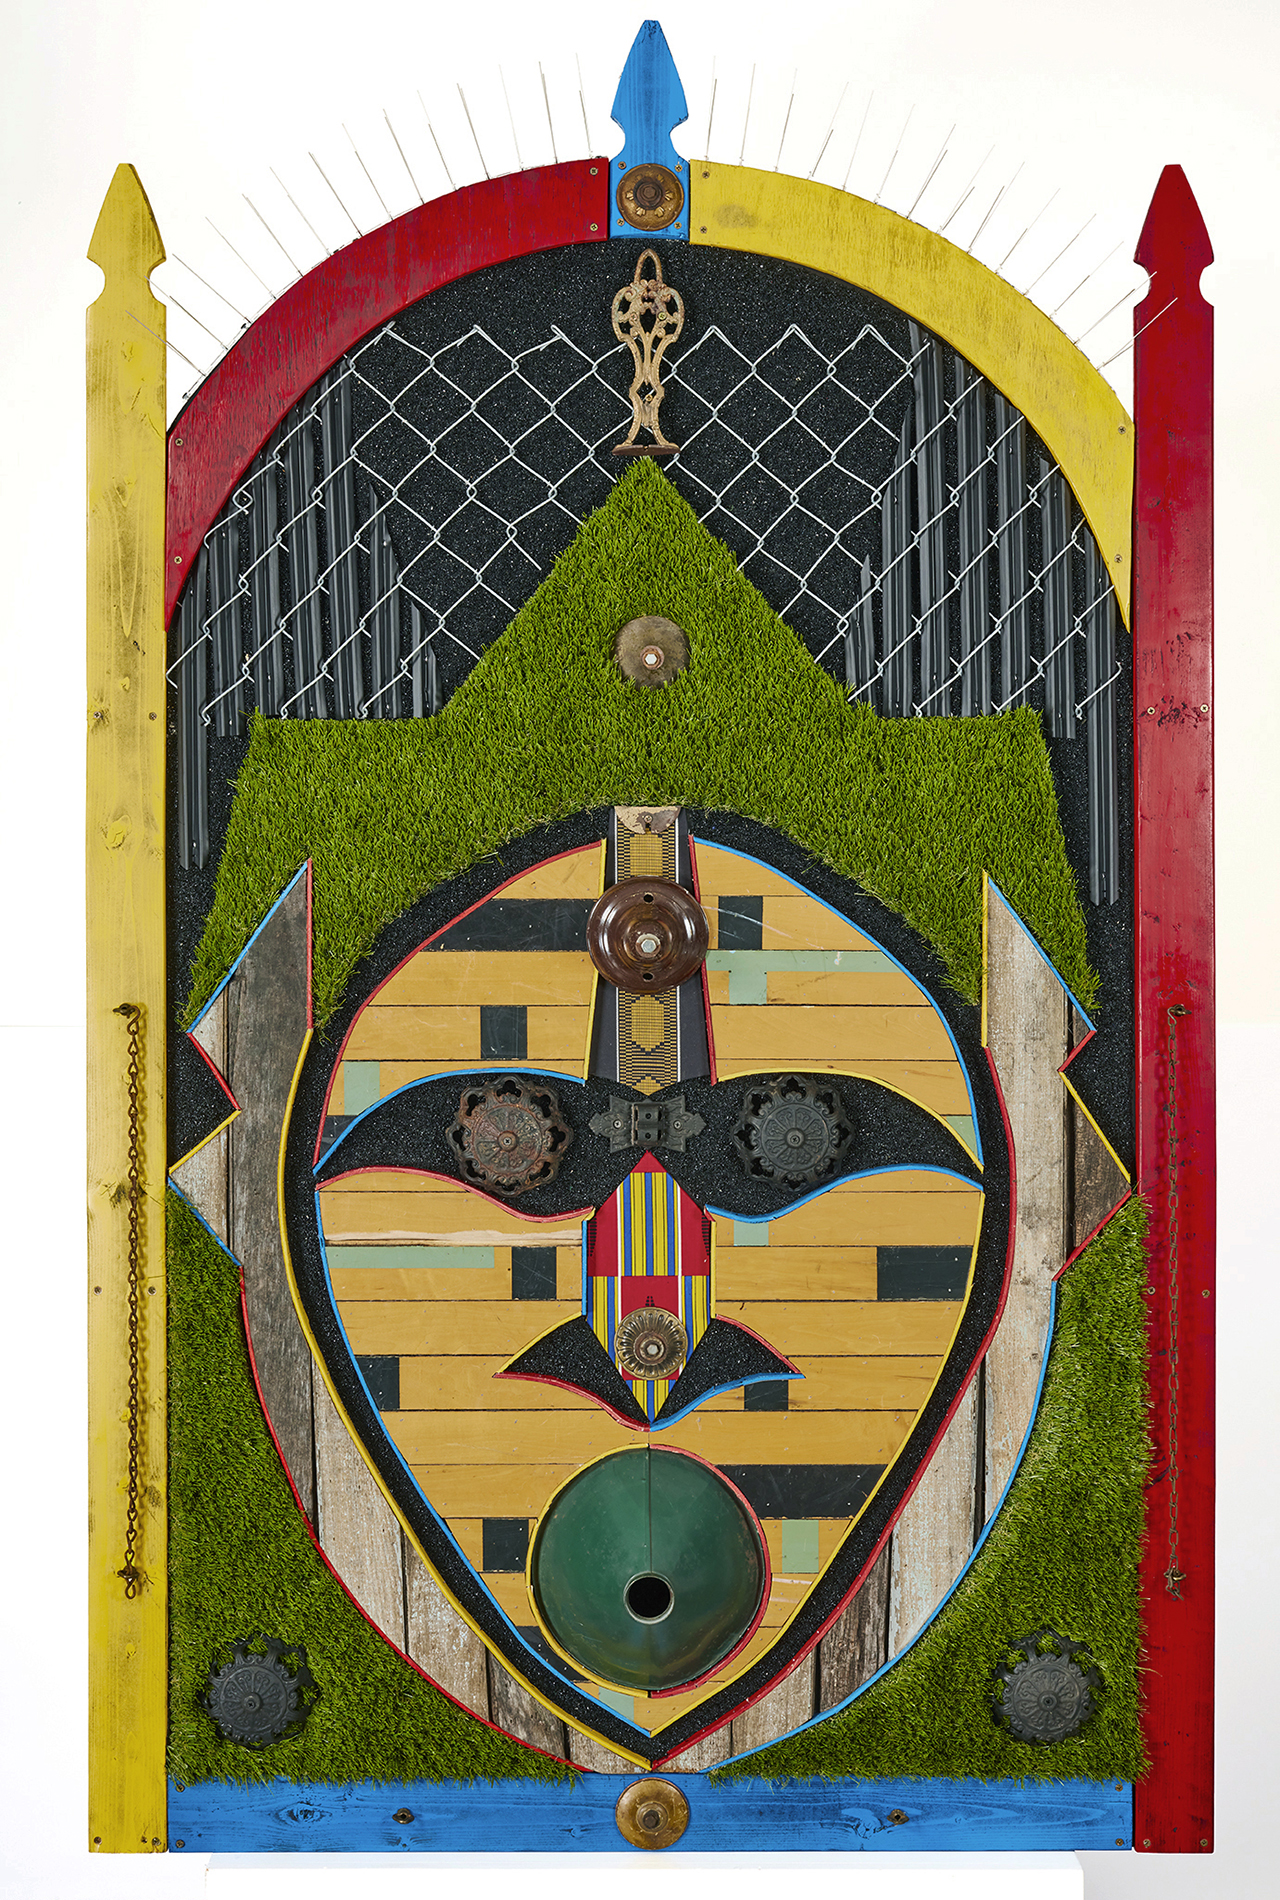 Sentinel, The Spotter; by Aaron Coleman. A mixed media assemblage evoking Ghanaian masks, made from fencing, fake turf, and salvaged wood from a neighbor's home lost to gentrification.